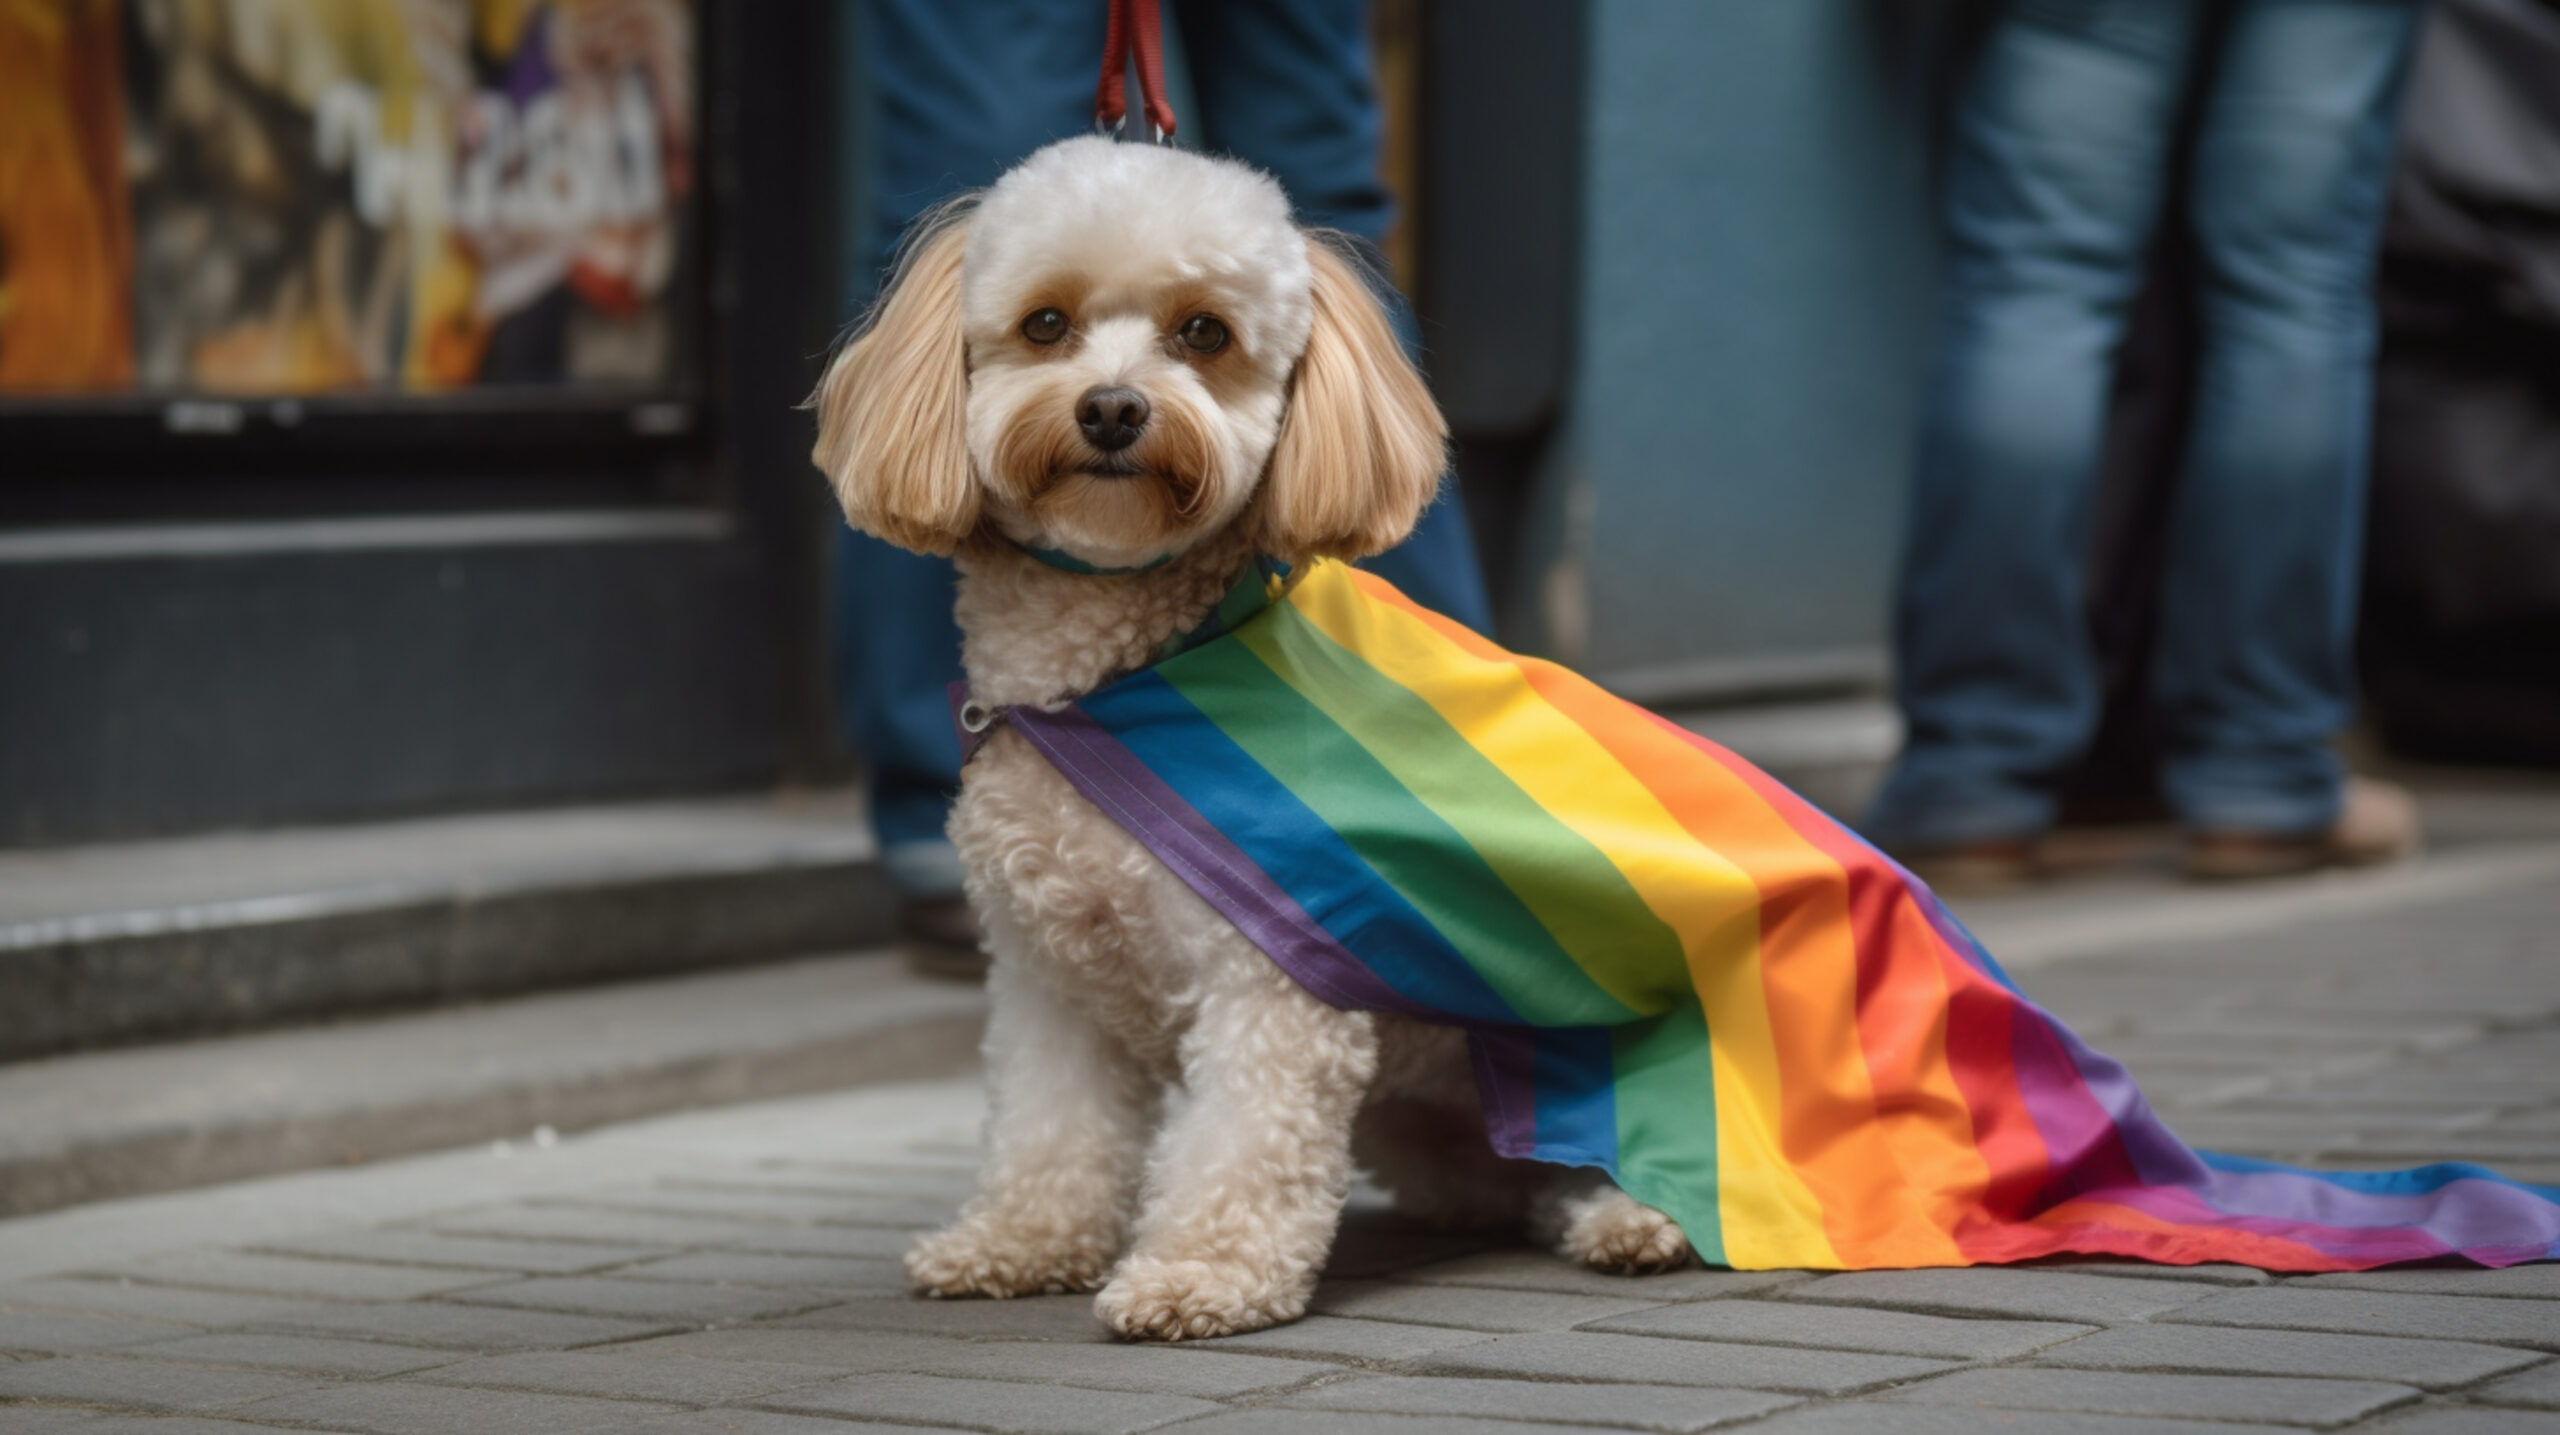 A poodle mix wearing the pride flag on its back.